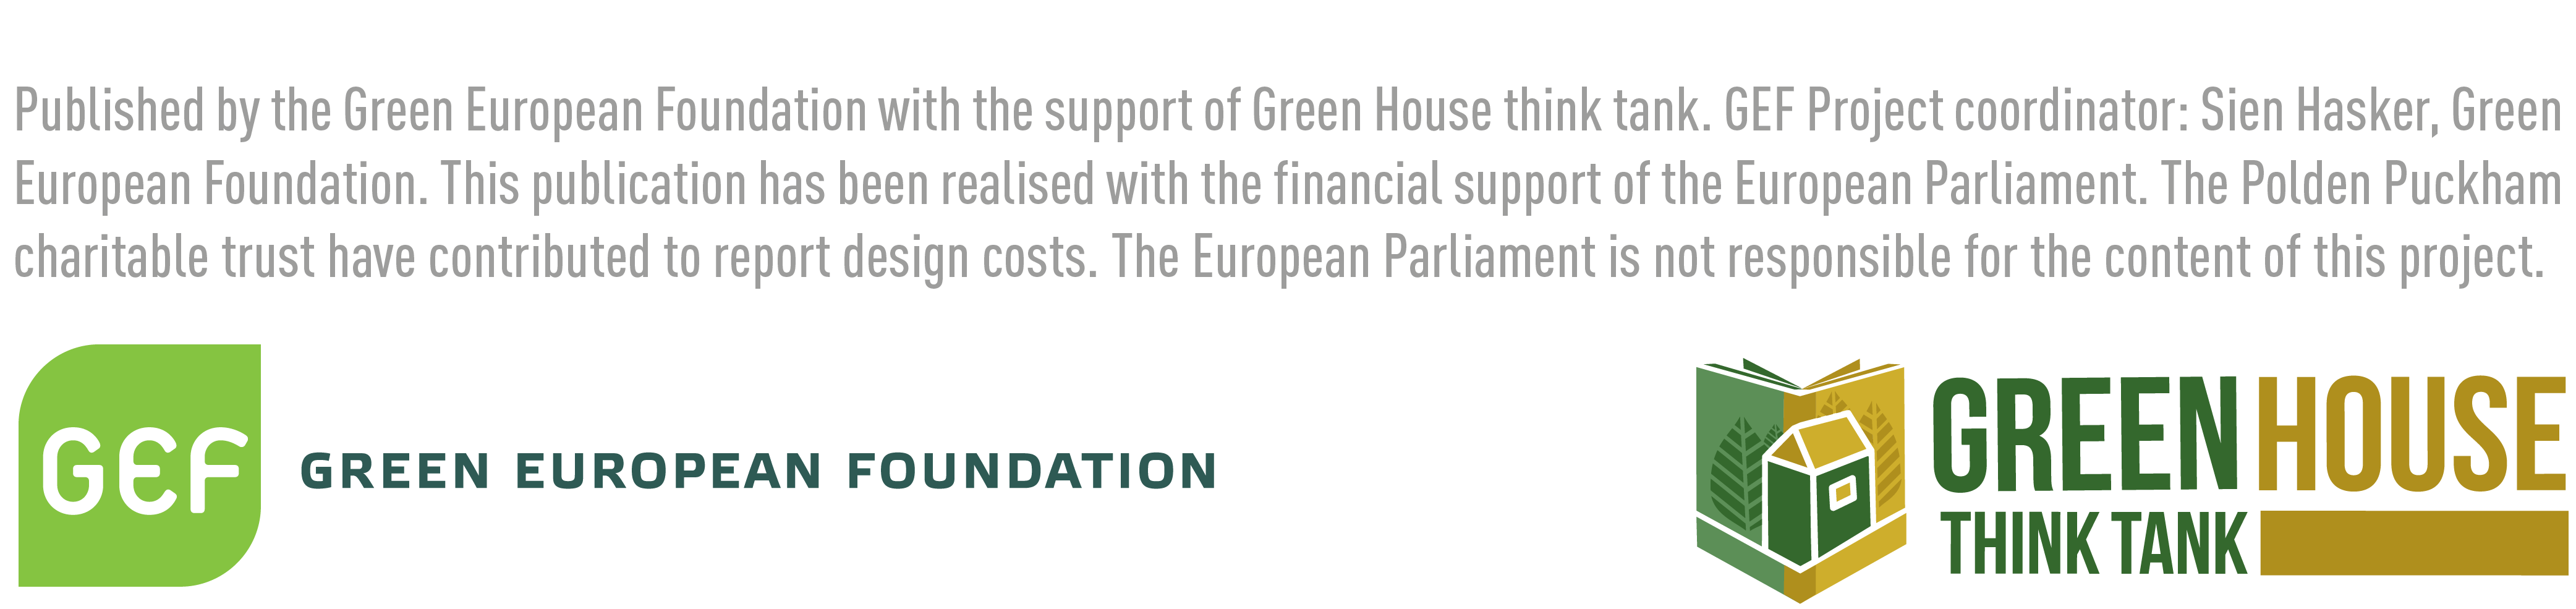 Image is of the Green European Foundation and Green House's logos with a statement which reads Published by the Green European Foundation with the support of Green House think tank. GEF project coordinator: Sian Hasker, Green European Foundation. This publication has been realised with financial support of the European parliament. The Polden Puckham charitable trust have contributed to the report design costs. The European Parliament is not responsible for the content of this project.